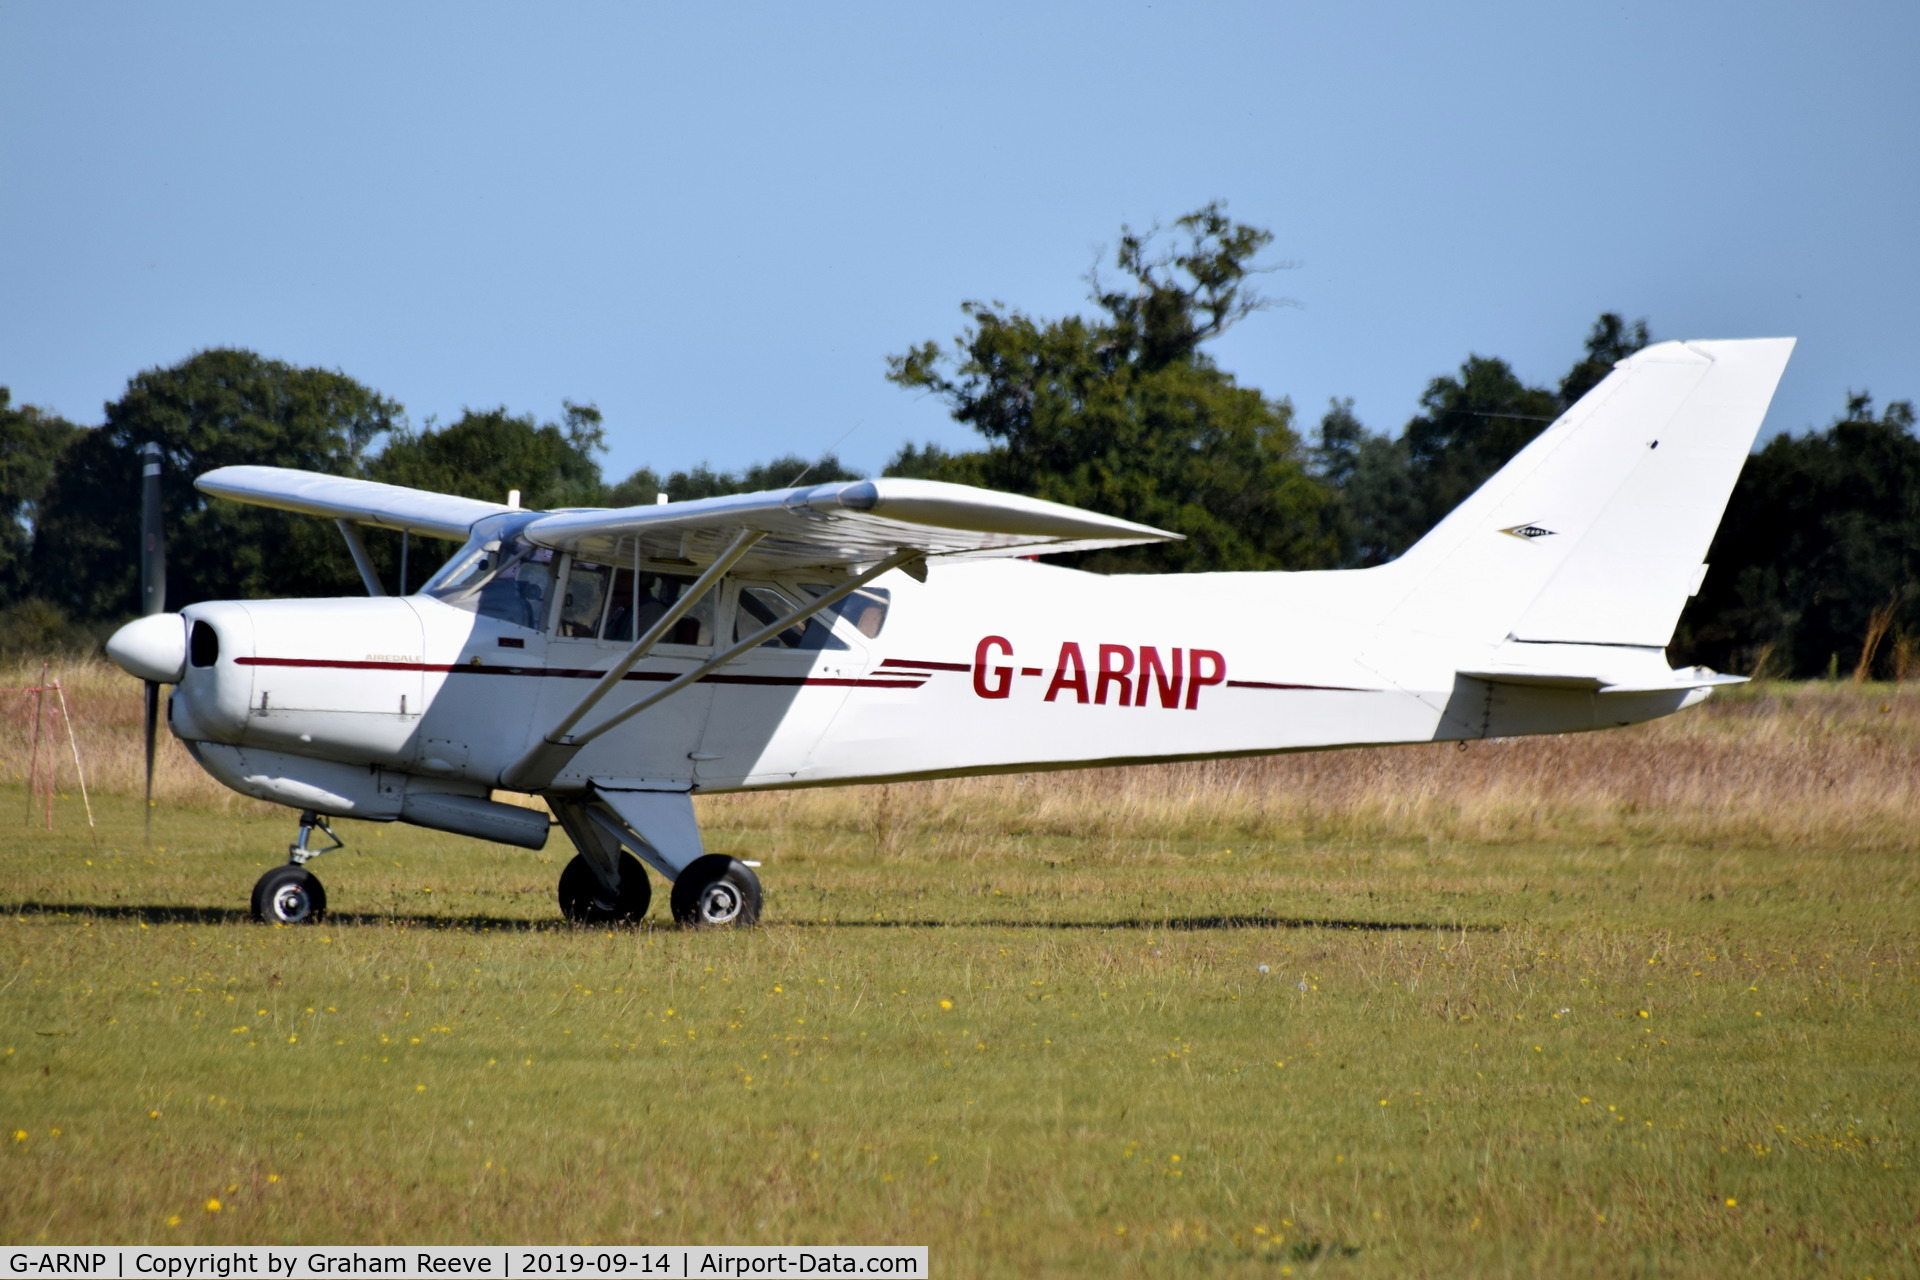 G-ARNP, 1961 Beagle A-109 Airdale C/N B.503, Just landed at, Bury St Edmunds, Rougham Airfield, UK.